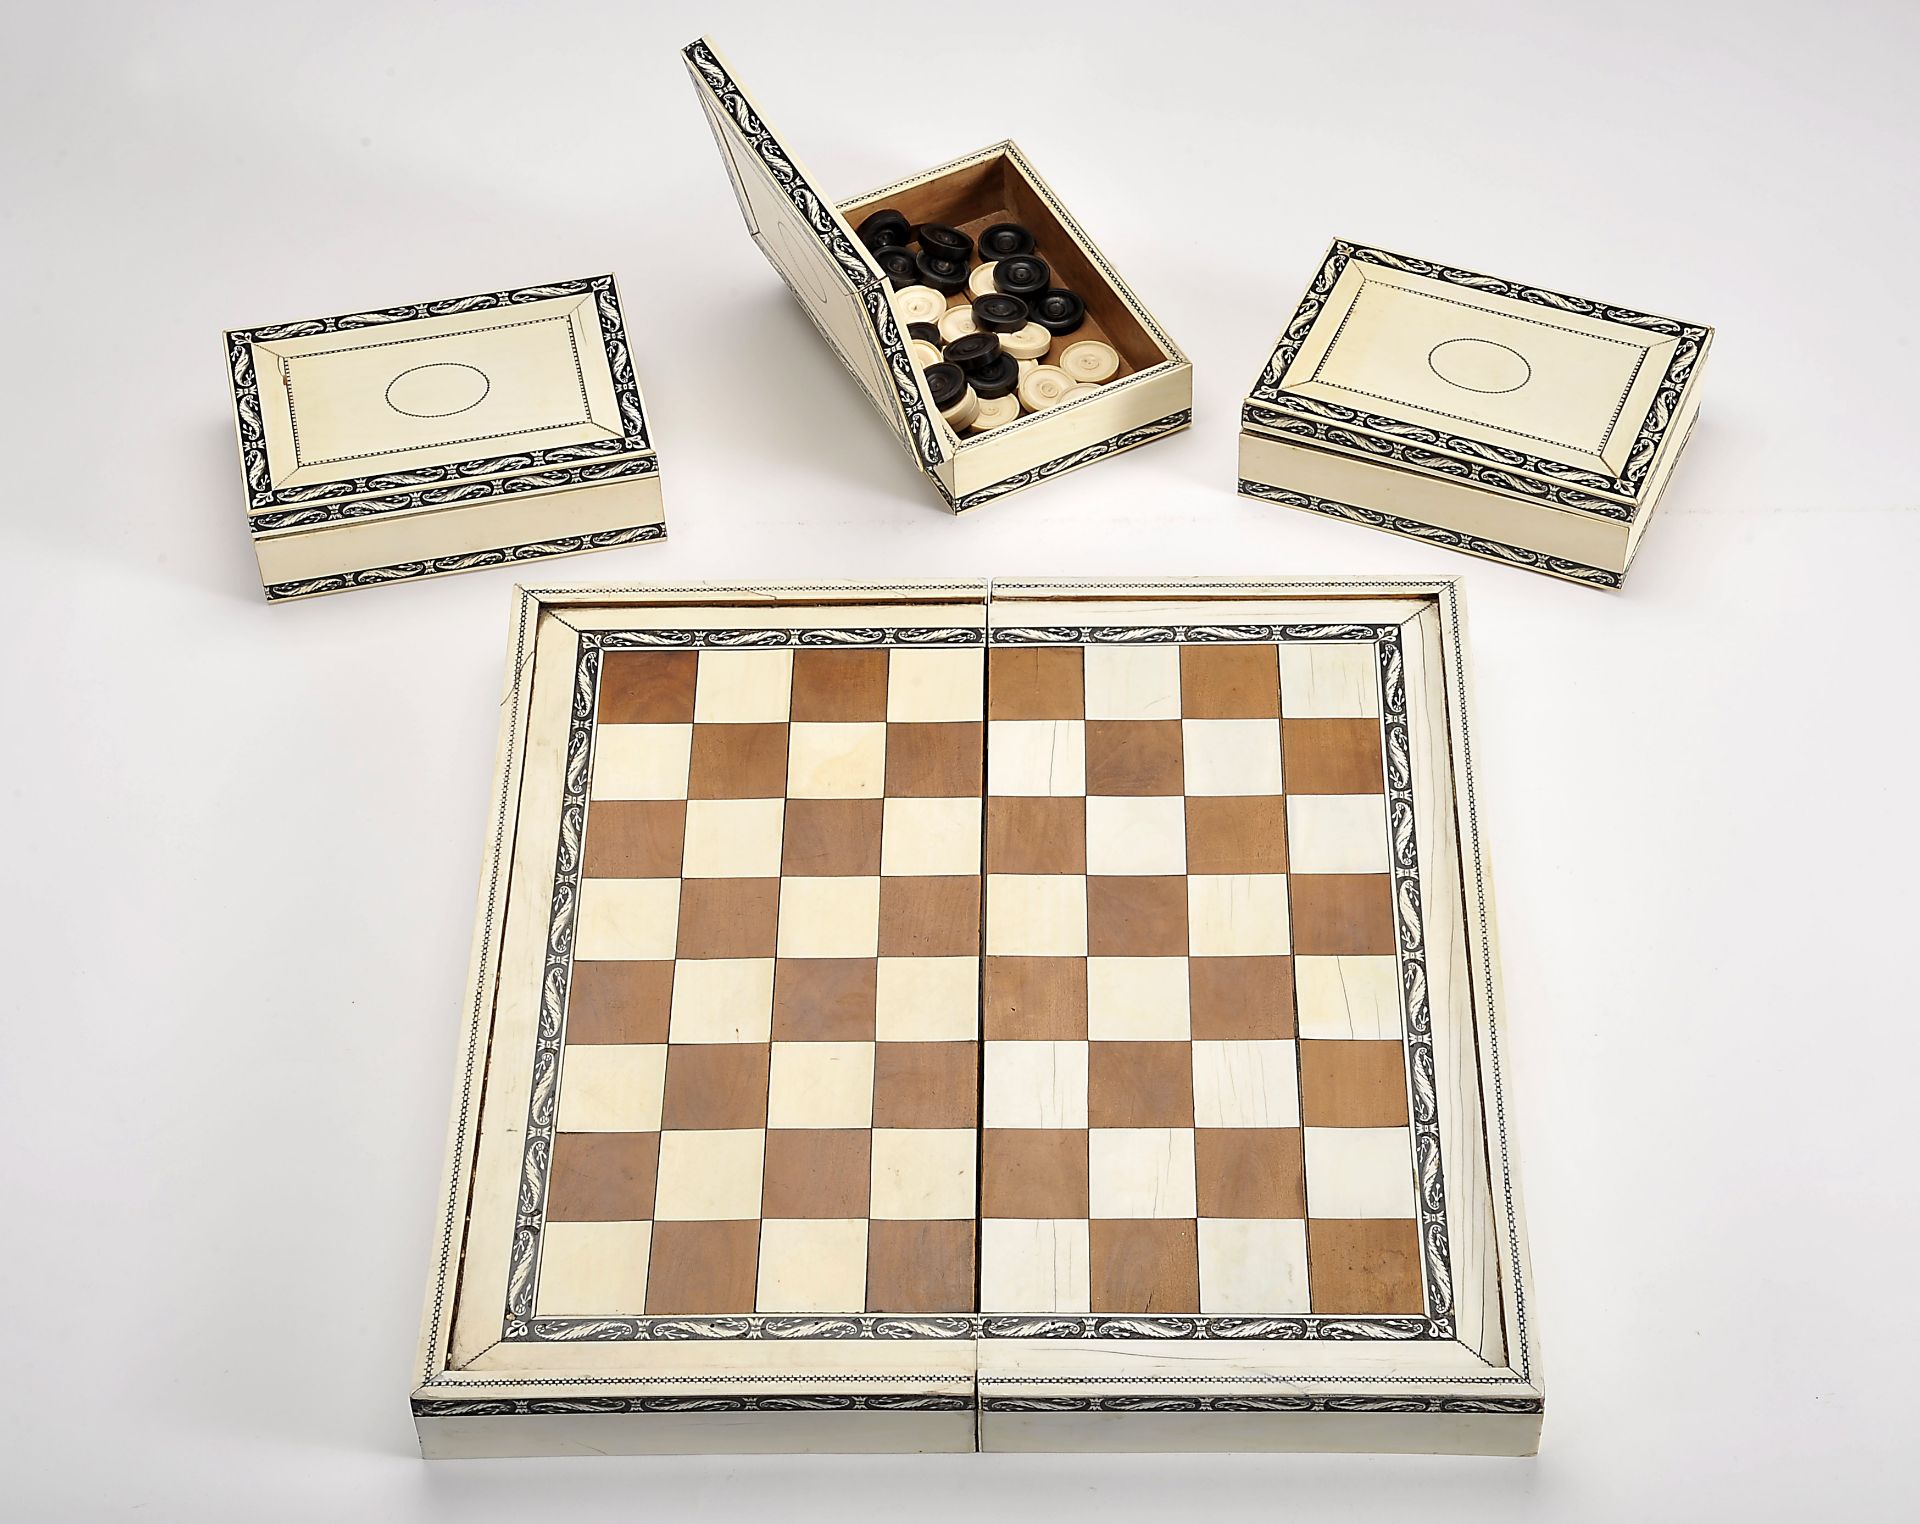 Chess and Backgammon pieces with an articulated board closing in the form of a box - Image 5 of 13